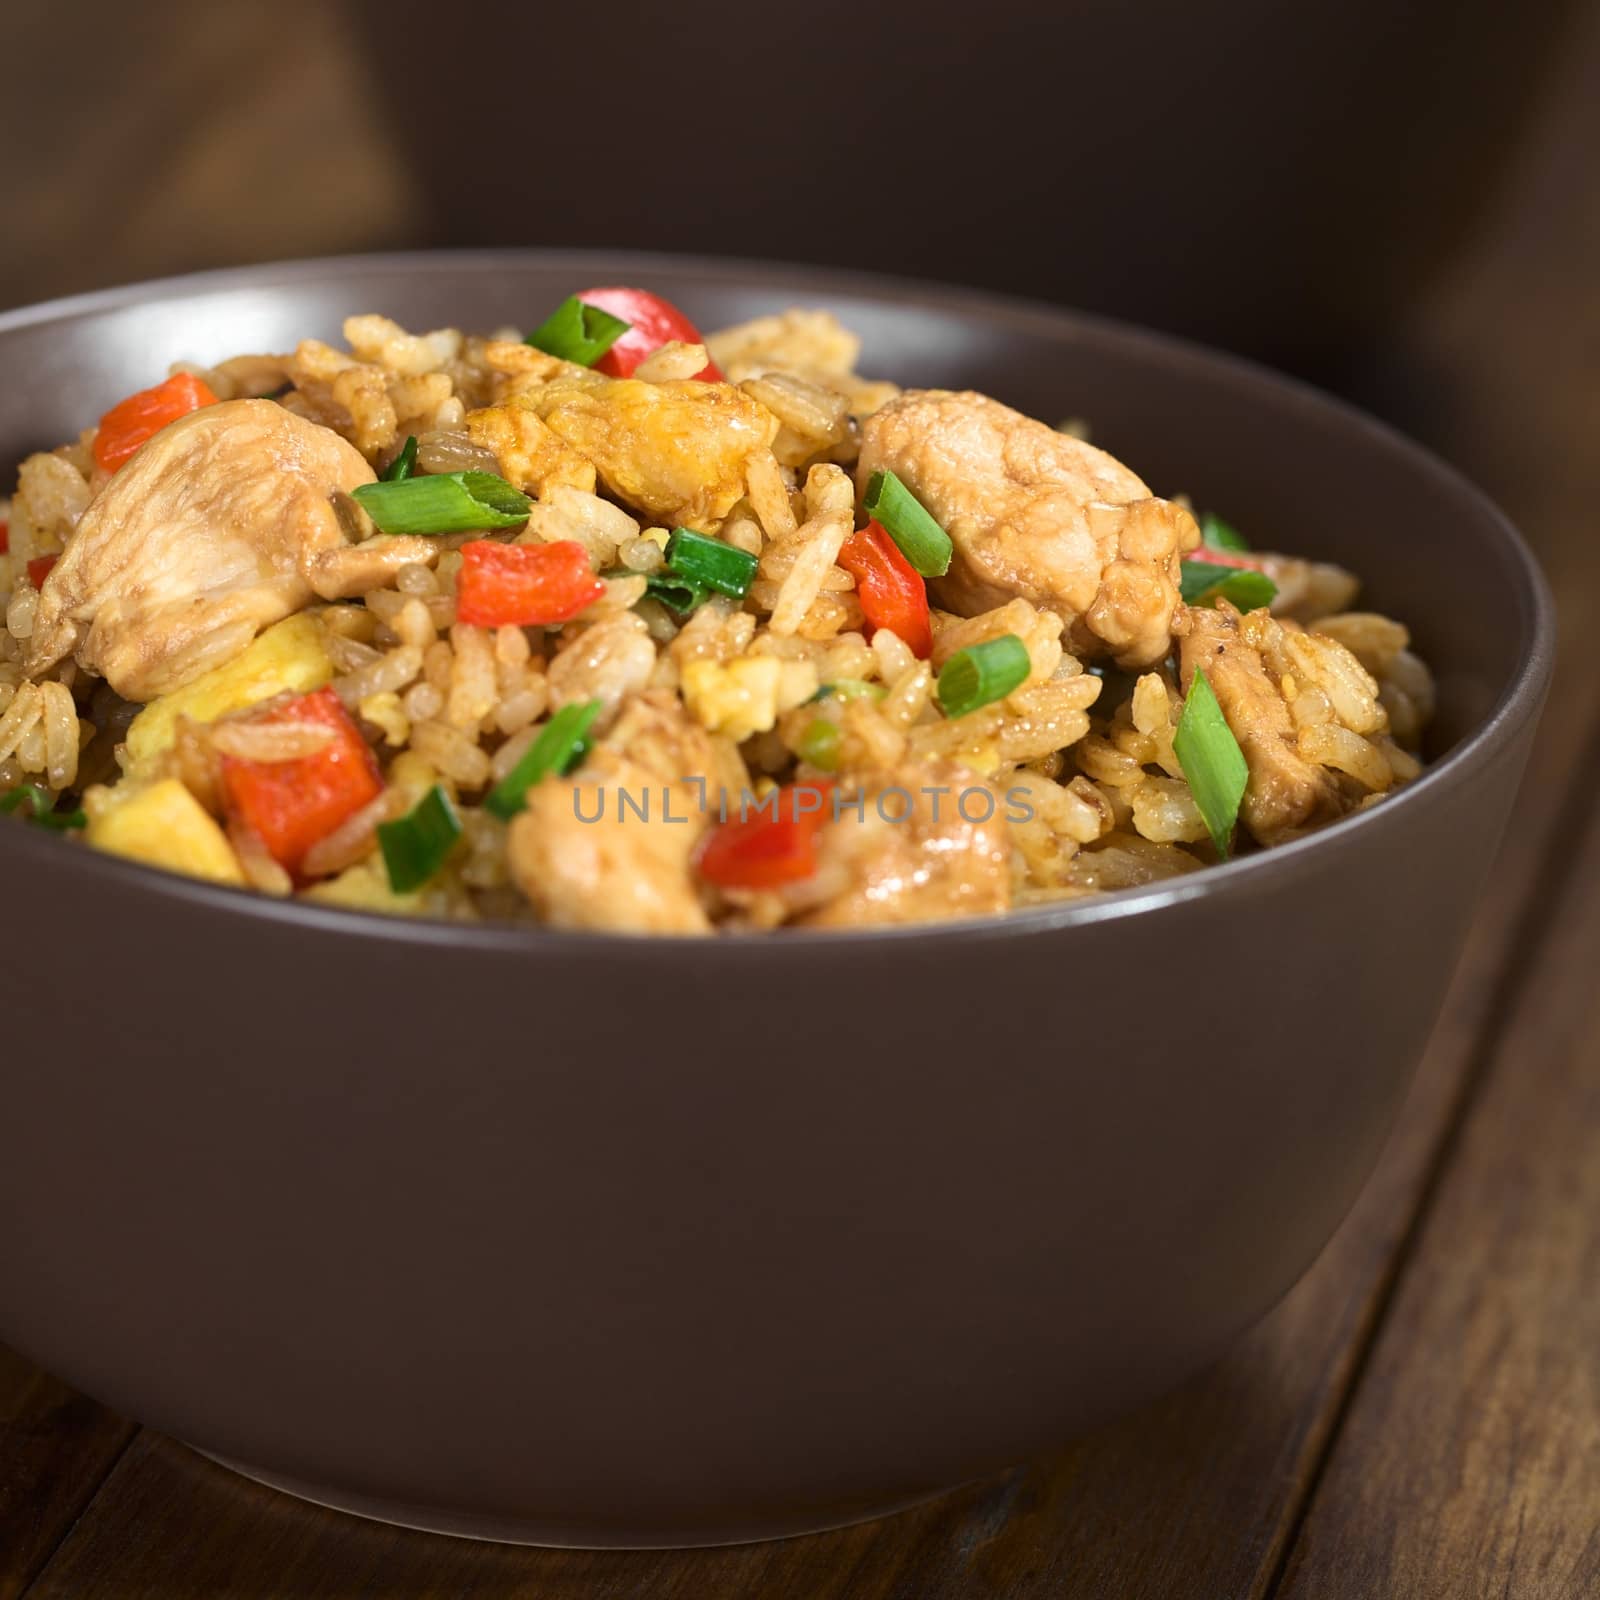 Fried Rice with Vegetables, Chicken and Egg by ildi